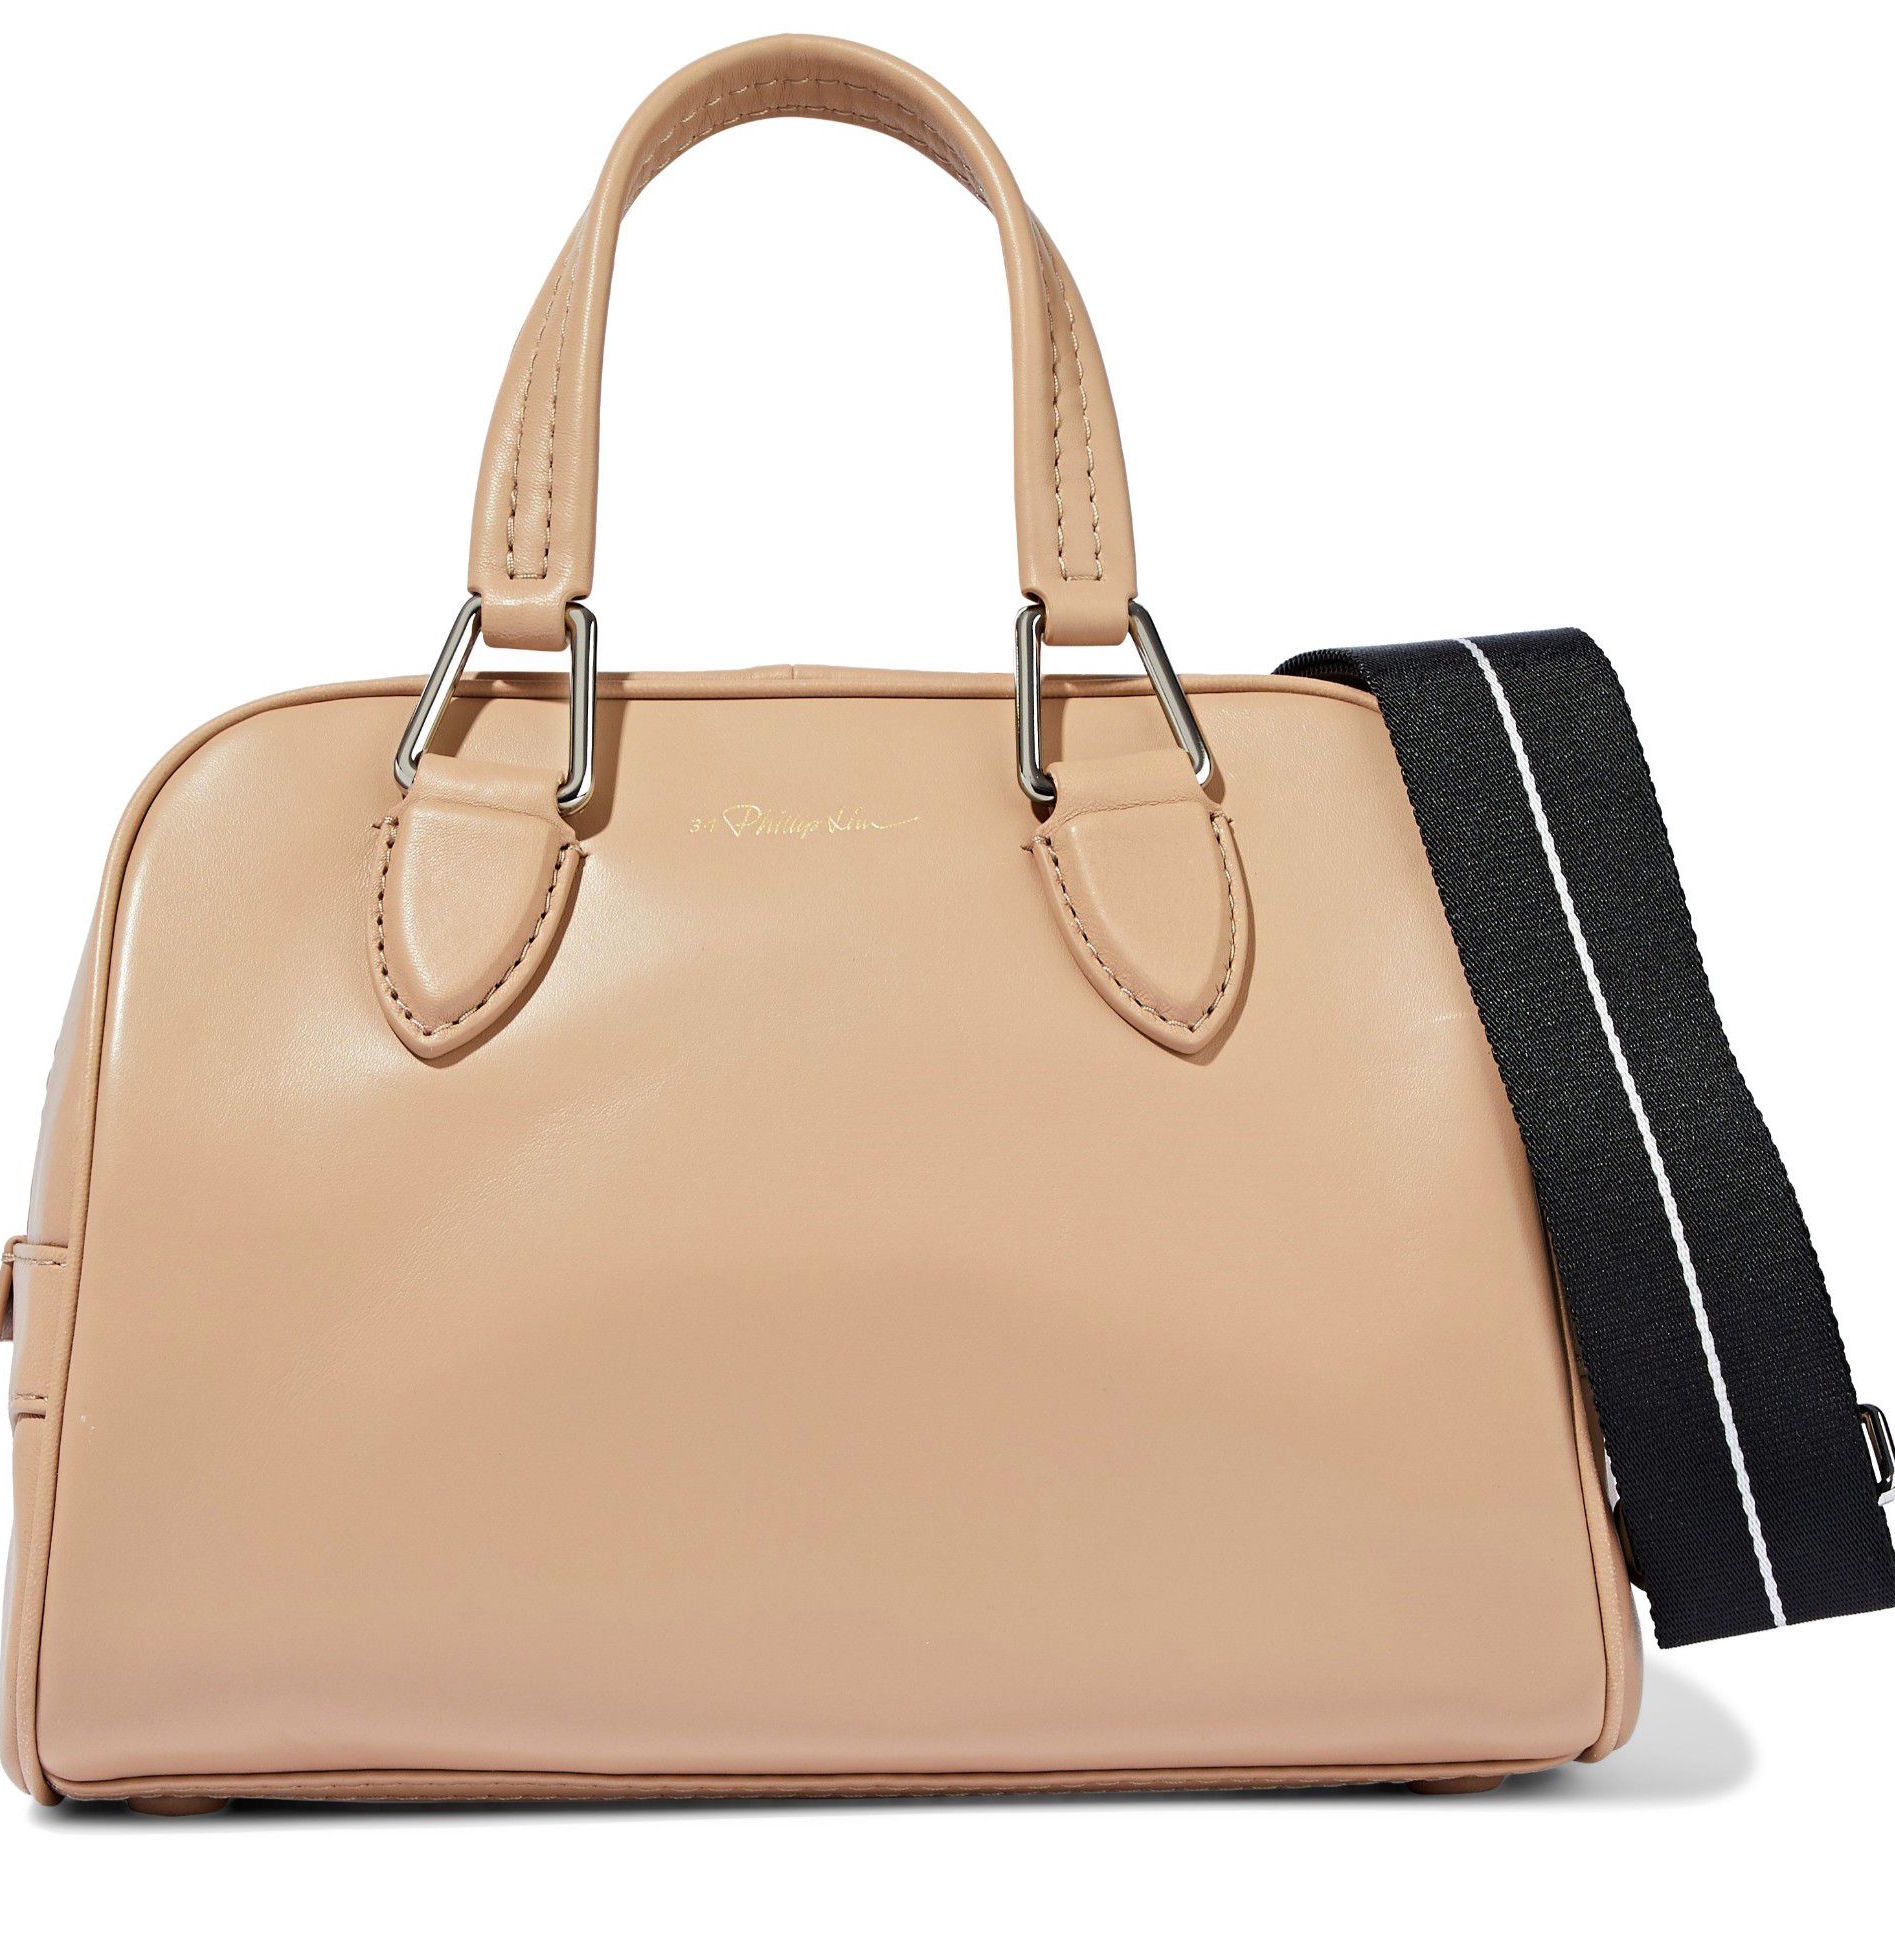 Designer Deal: This 3.1 Phillip Lim Bag Is Half Off at The Outnet